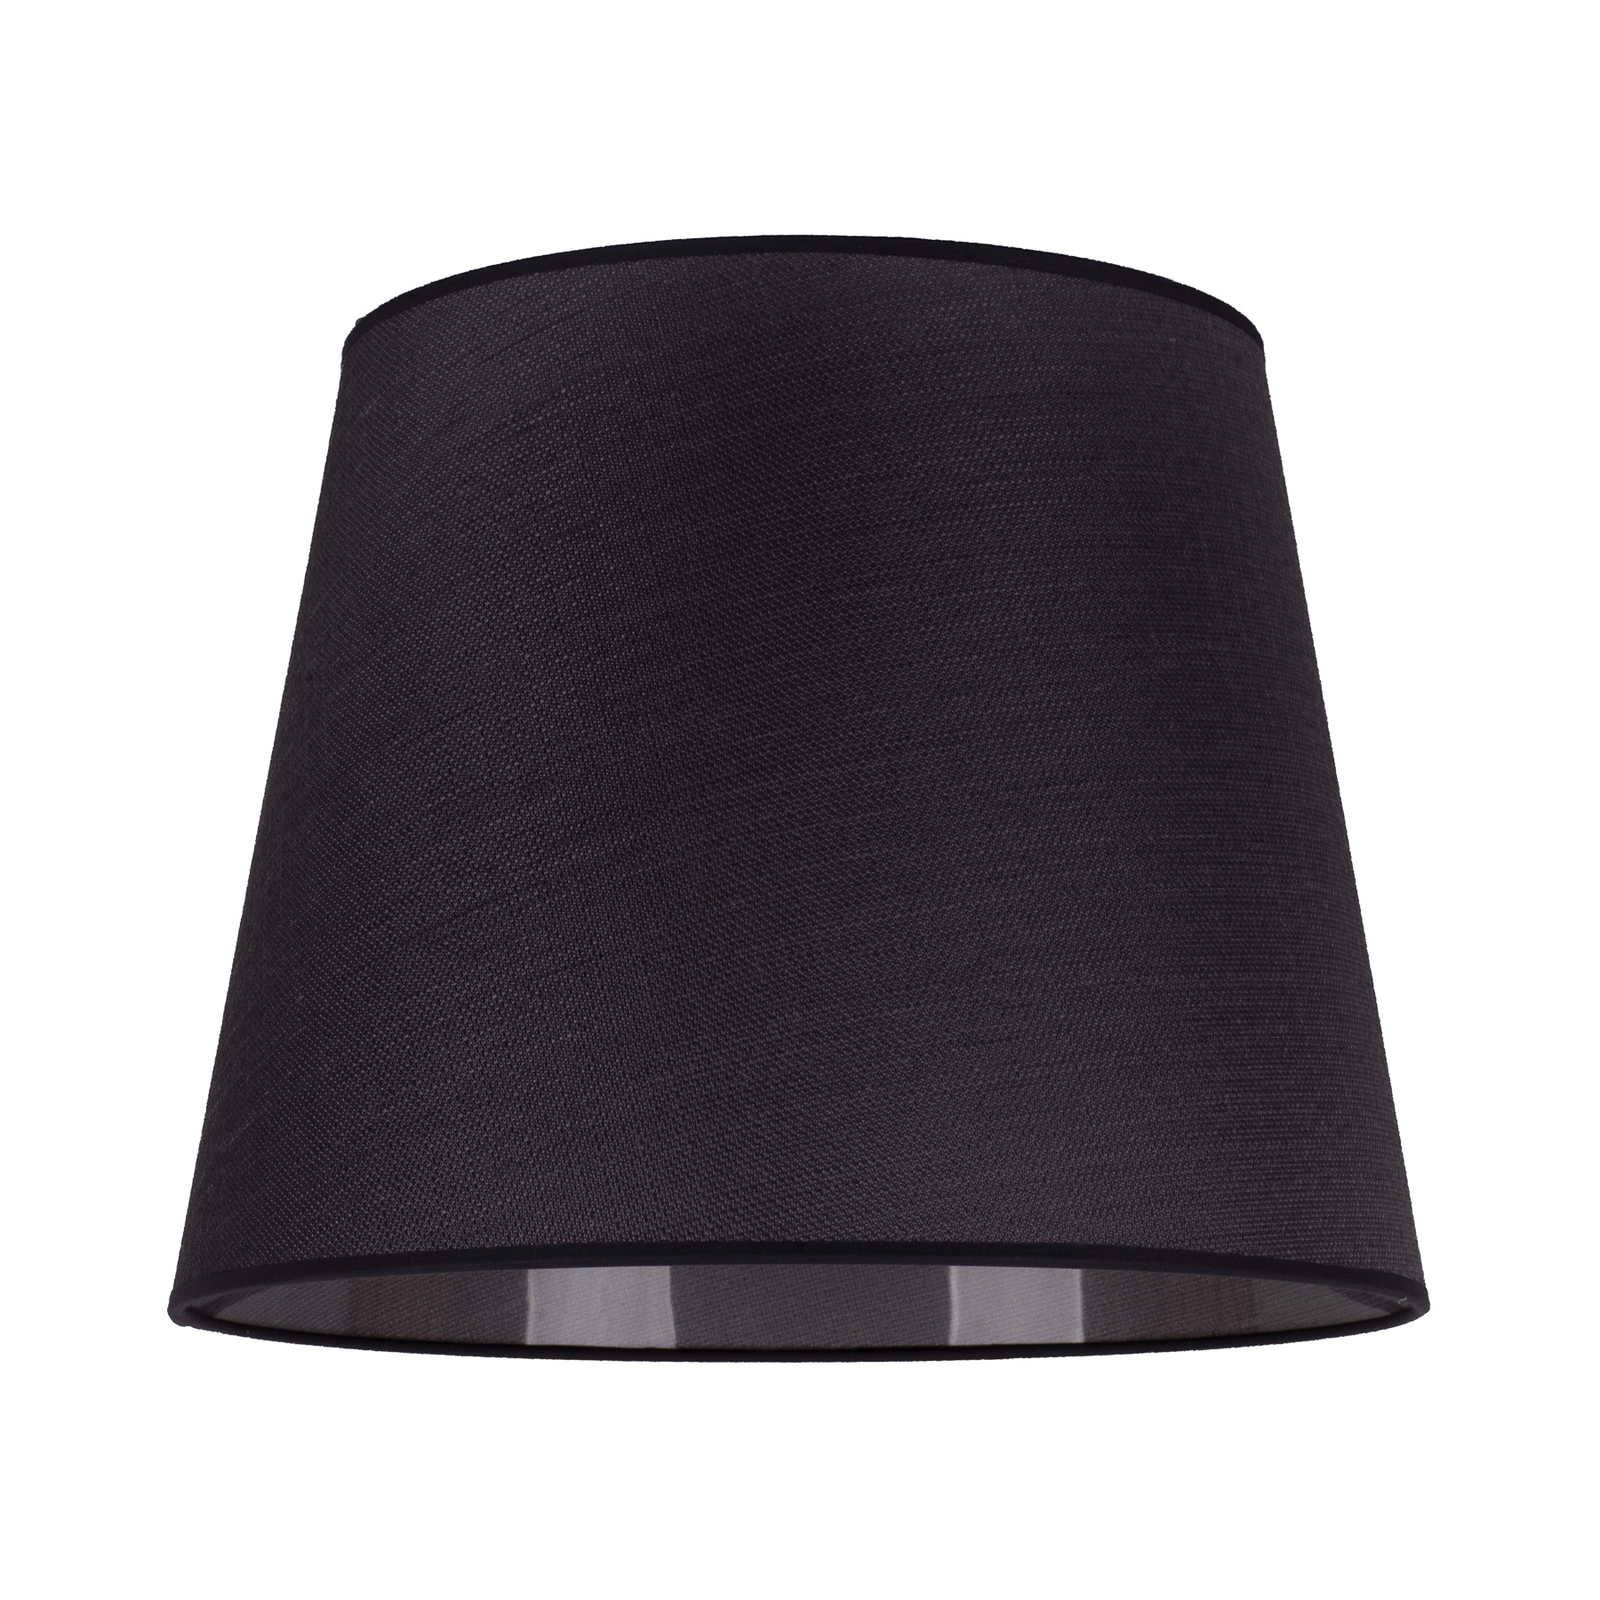 Classic L lampshade for hanging lights, graphite